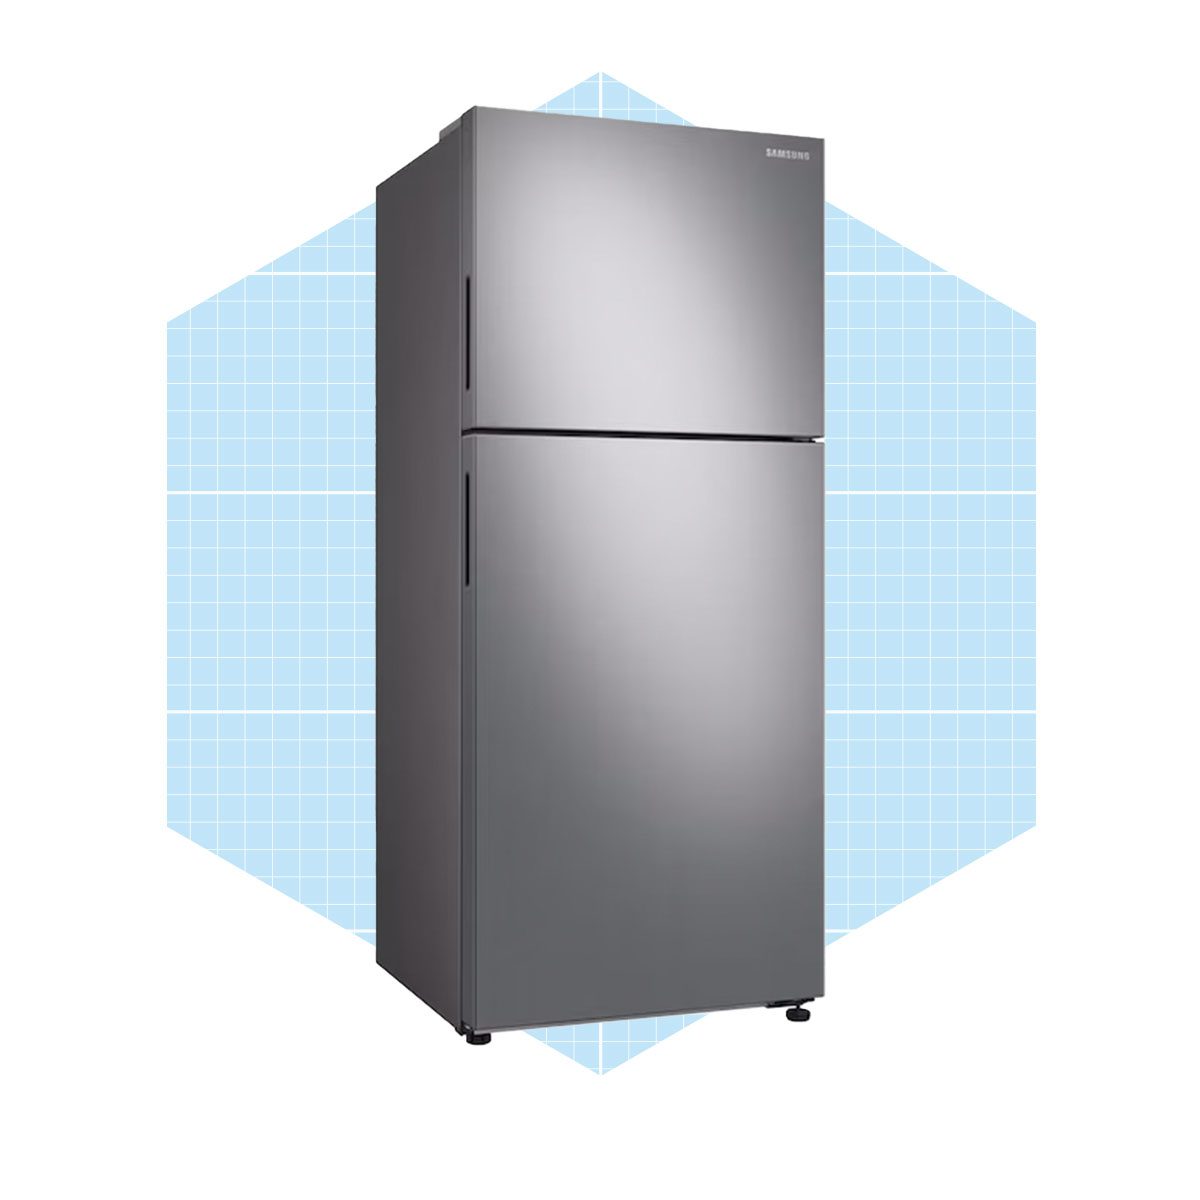 Can I Keep My Fridge/Freezer in the Garage Safely?